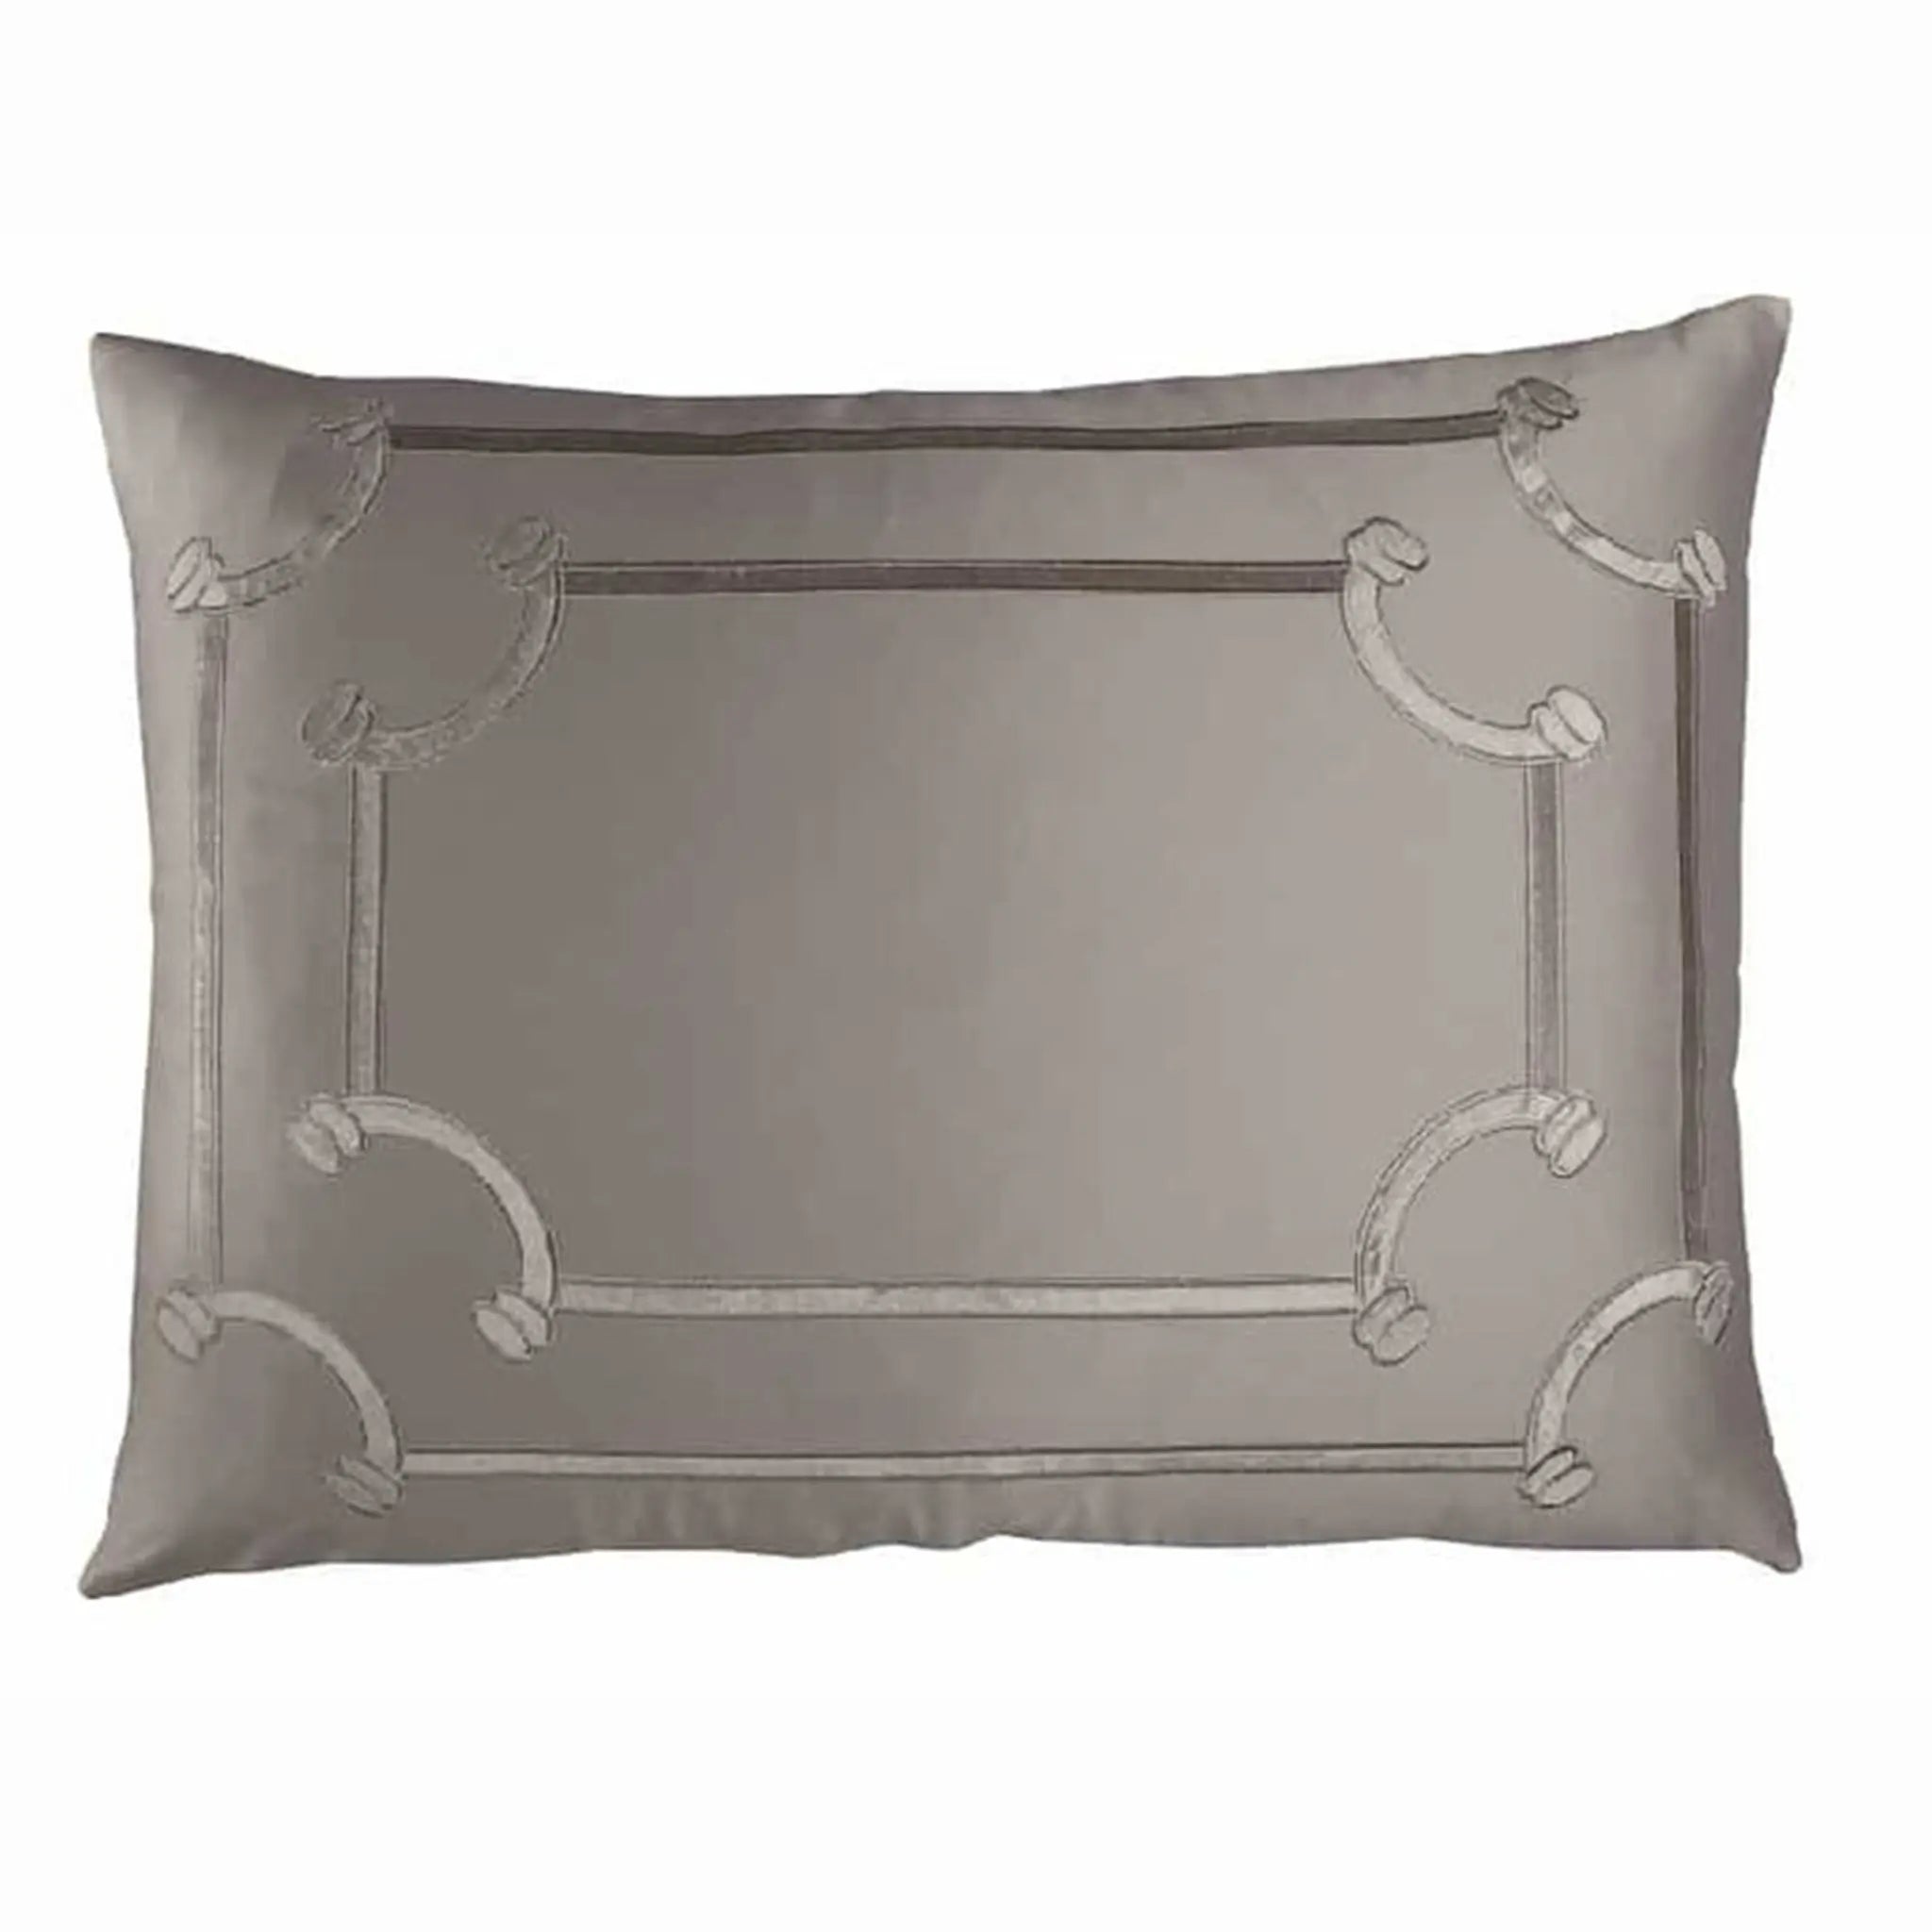 Lili Alessandra Vendome Standard Pillow in Taupe and Fawn